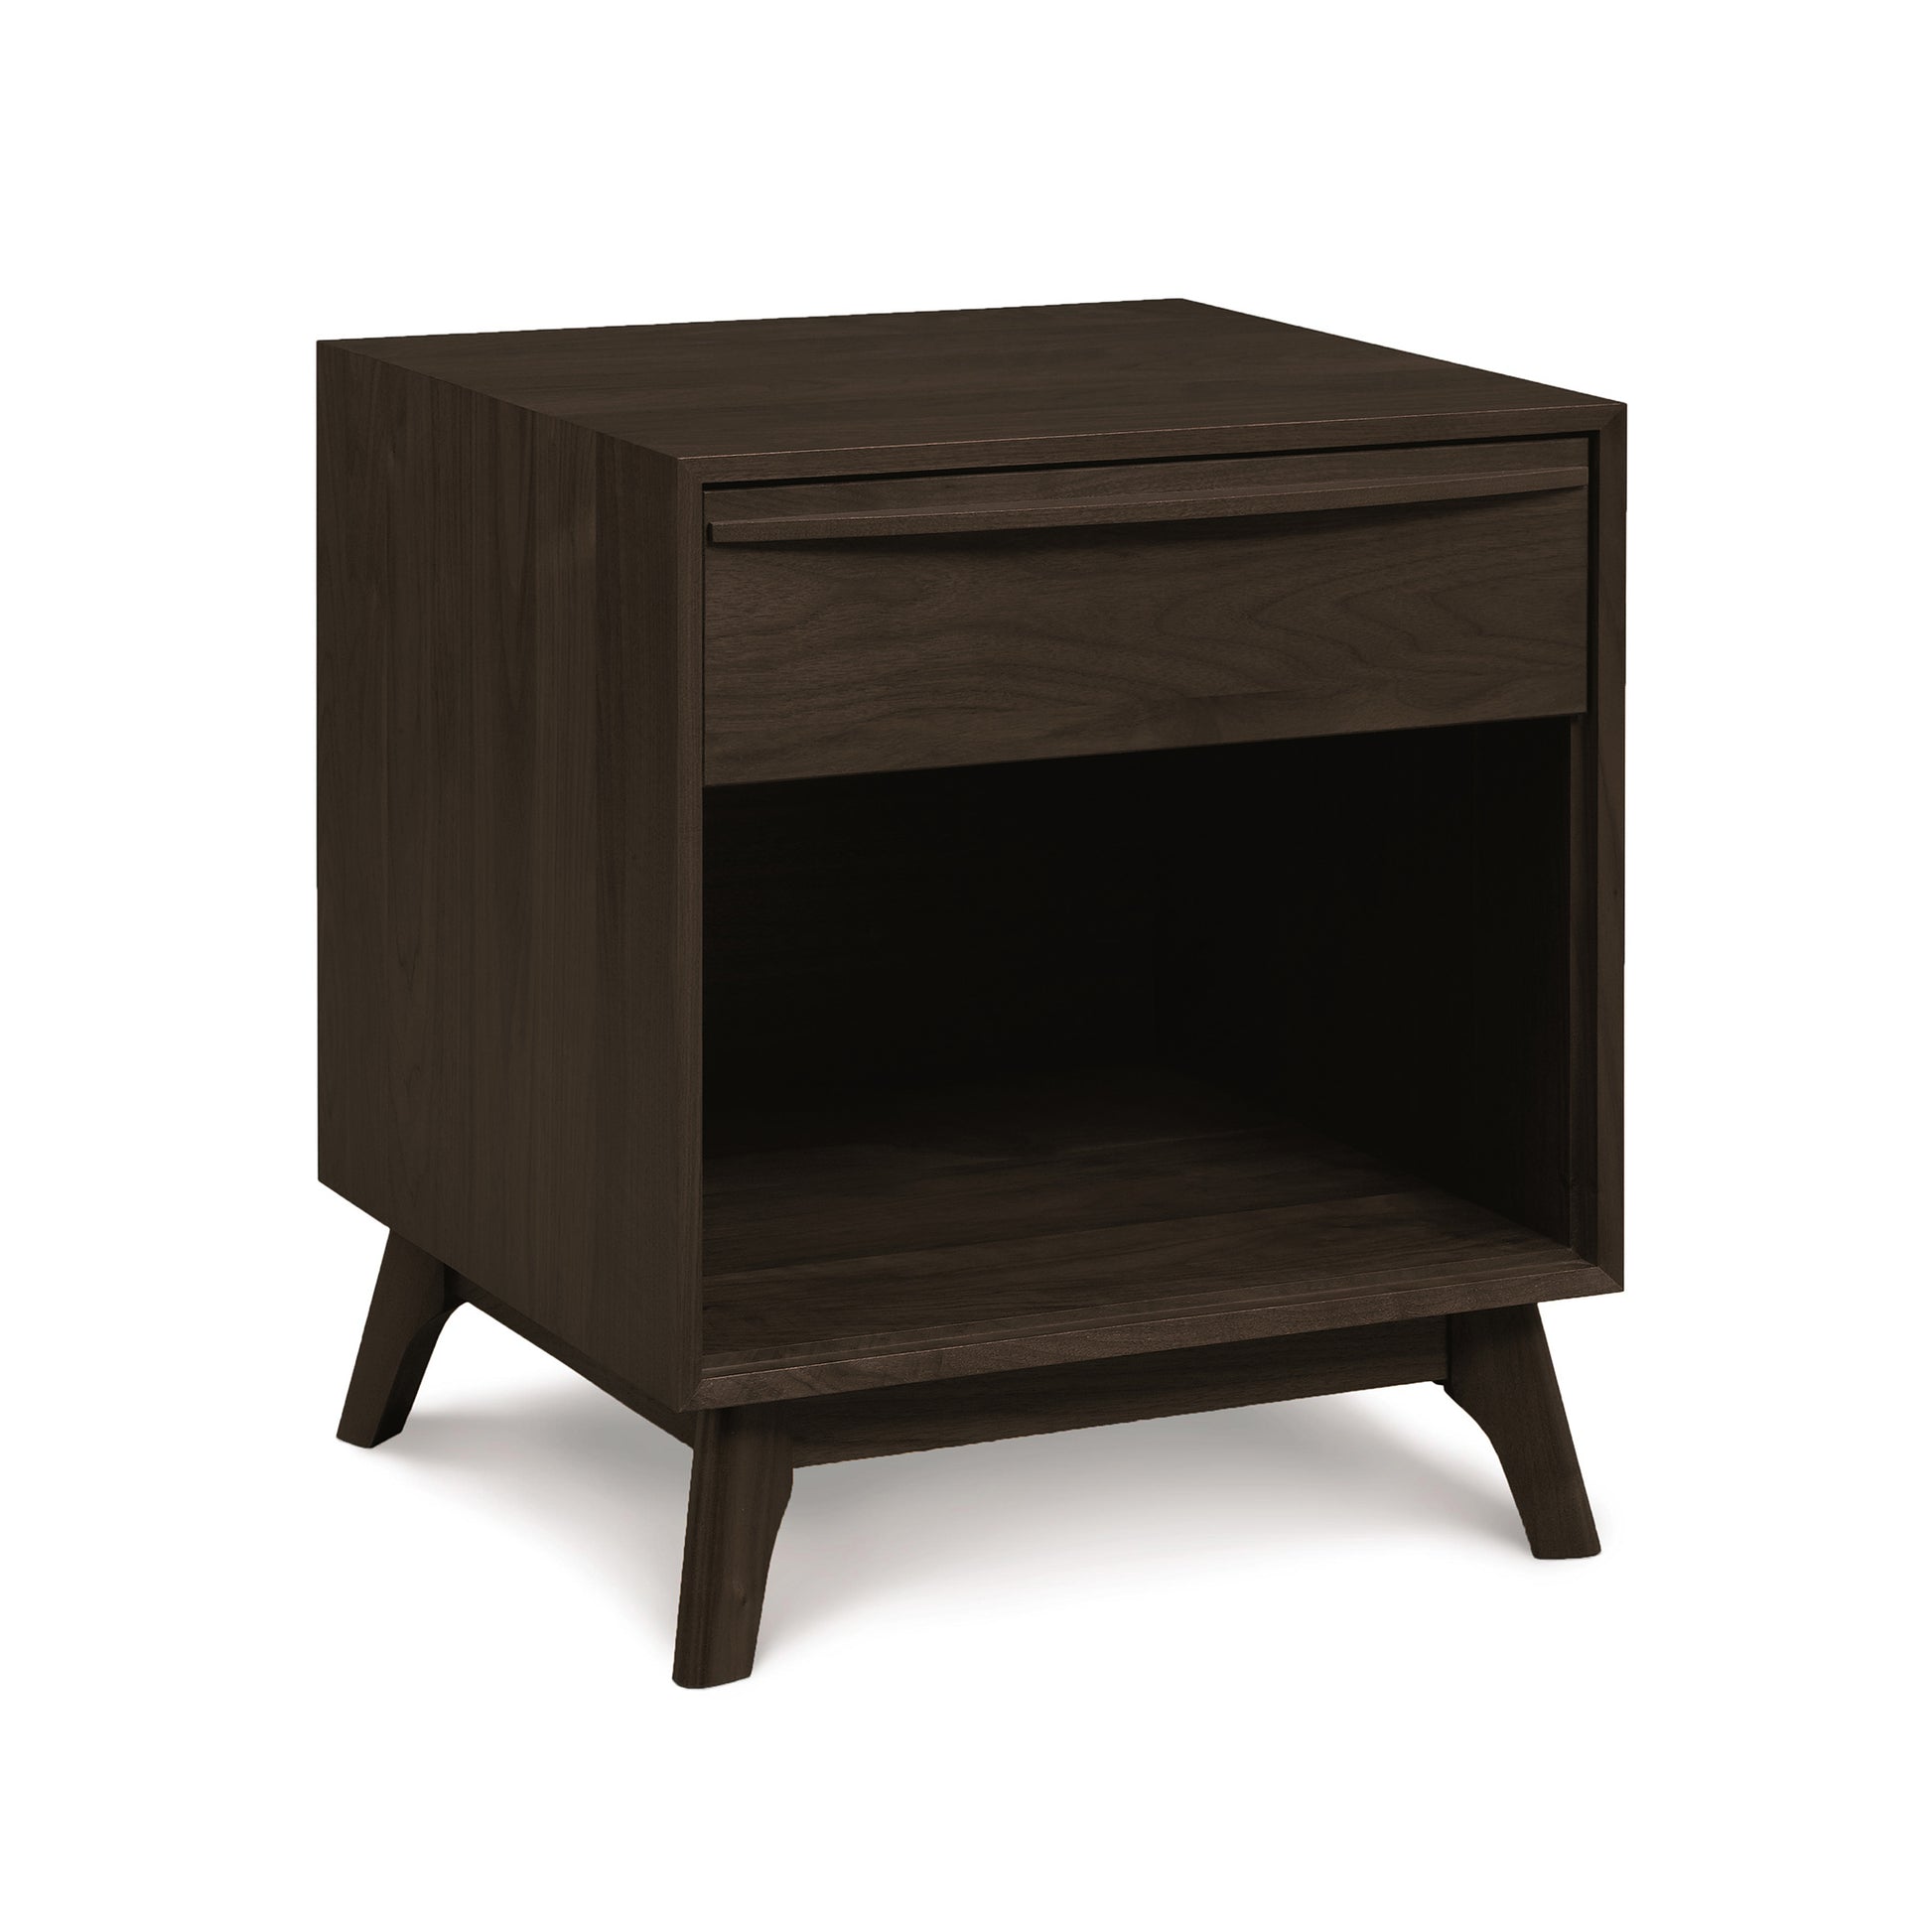 The Catalina 1-Drawer Enclosed Shelf Nightstand by Copeland Furniture is a modern bedroom essential with its sleek design and solid wood construction. It features two drawers for convenient storage and a sturdy wooden base.